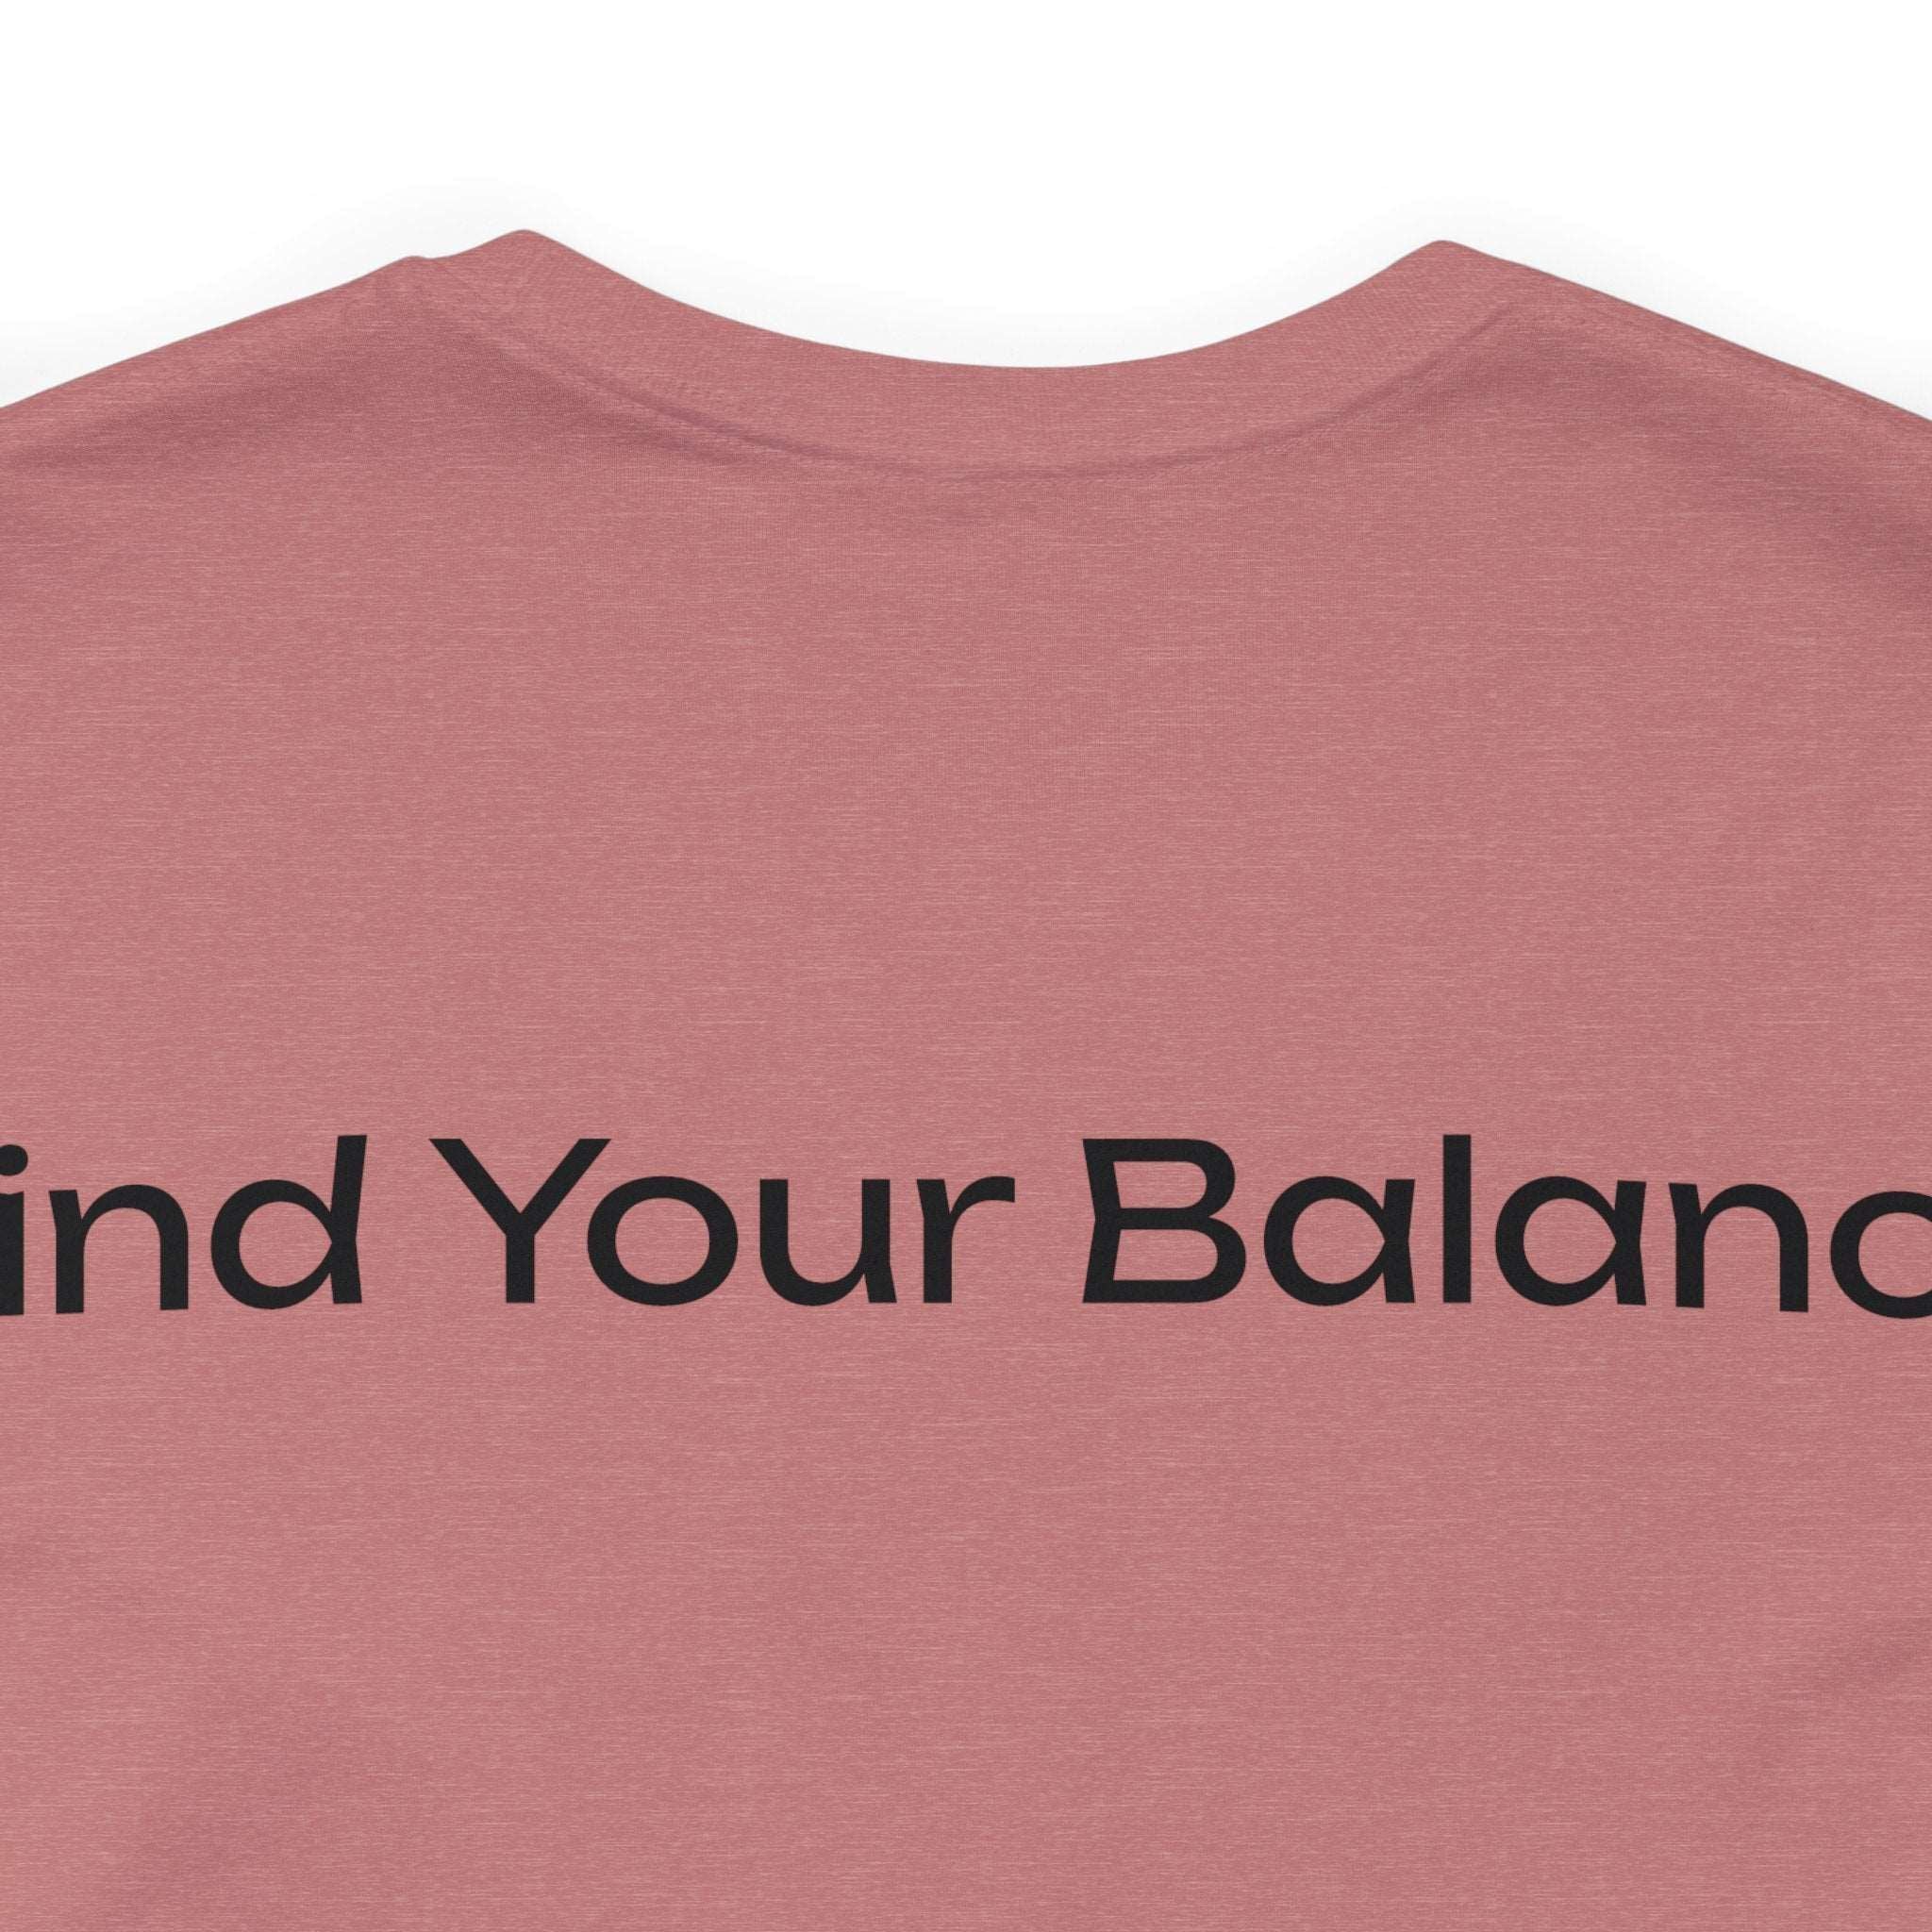 Find Your Balance Jersey Tee - Bella+Canvas 3001 Heather Mauve Airlume Cotton Bella+Canvas 3001 Crew Neckline Jersey Short Sleeve Lightweight Fabric Mental Health Support Retail Fit Tear-away Label Tee Unisex Tee T-Shirt 17048628353677299342_2048_34ed11e6-d730-4e88-b5f0-8c1b4f37ae3d Printify